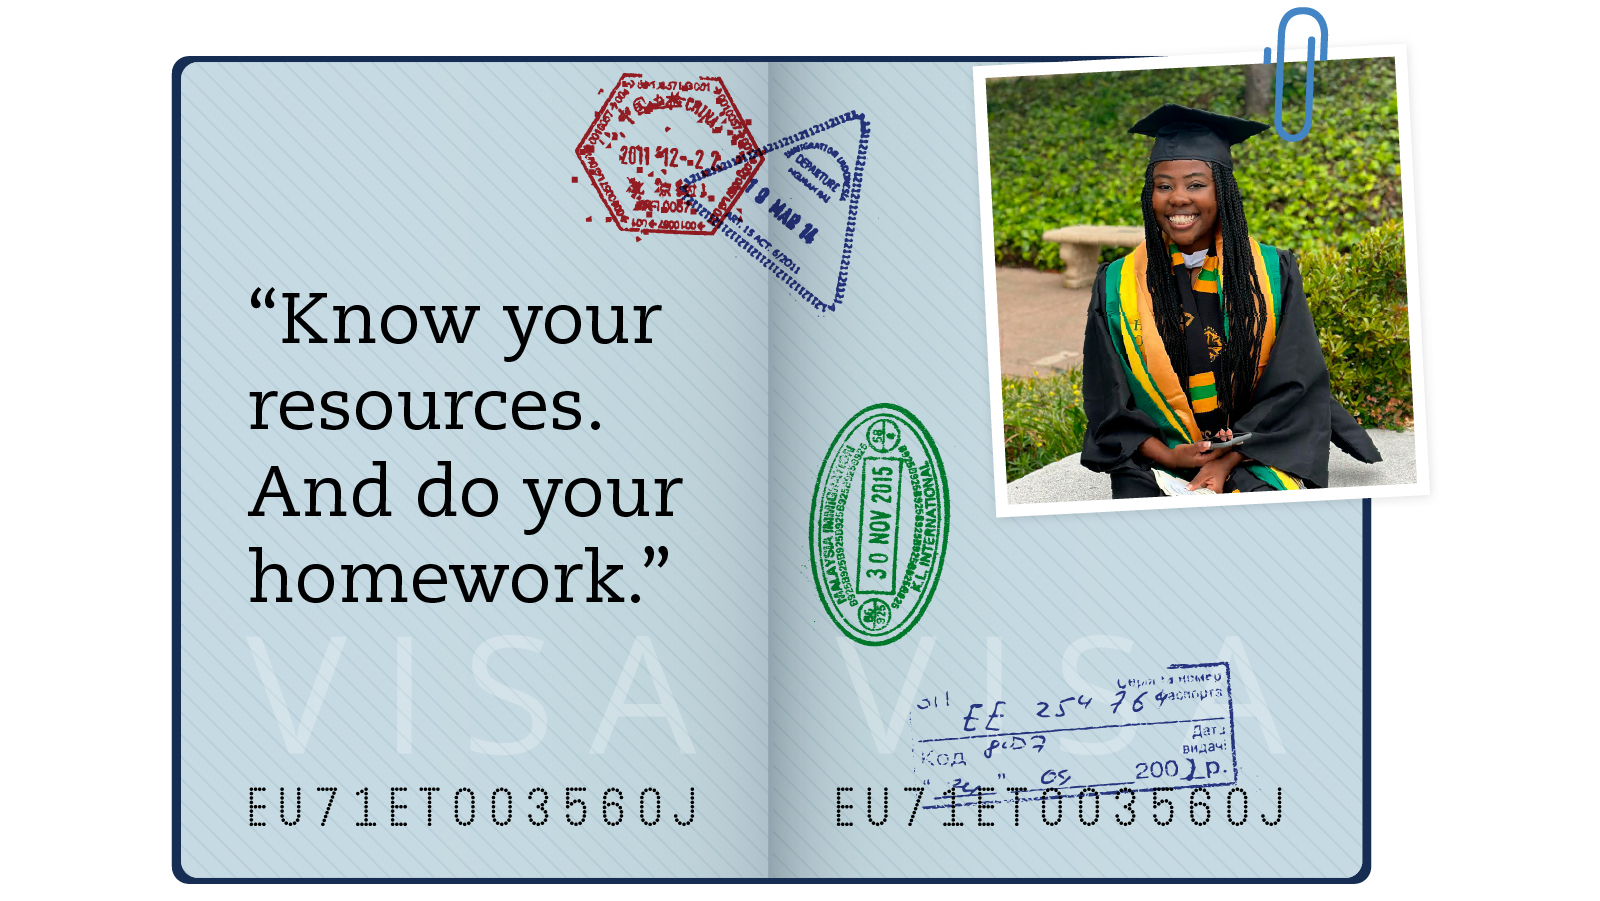 Passport illustration describing, "Know your resources. And do your homework."